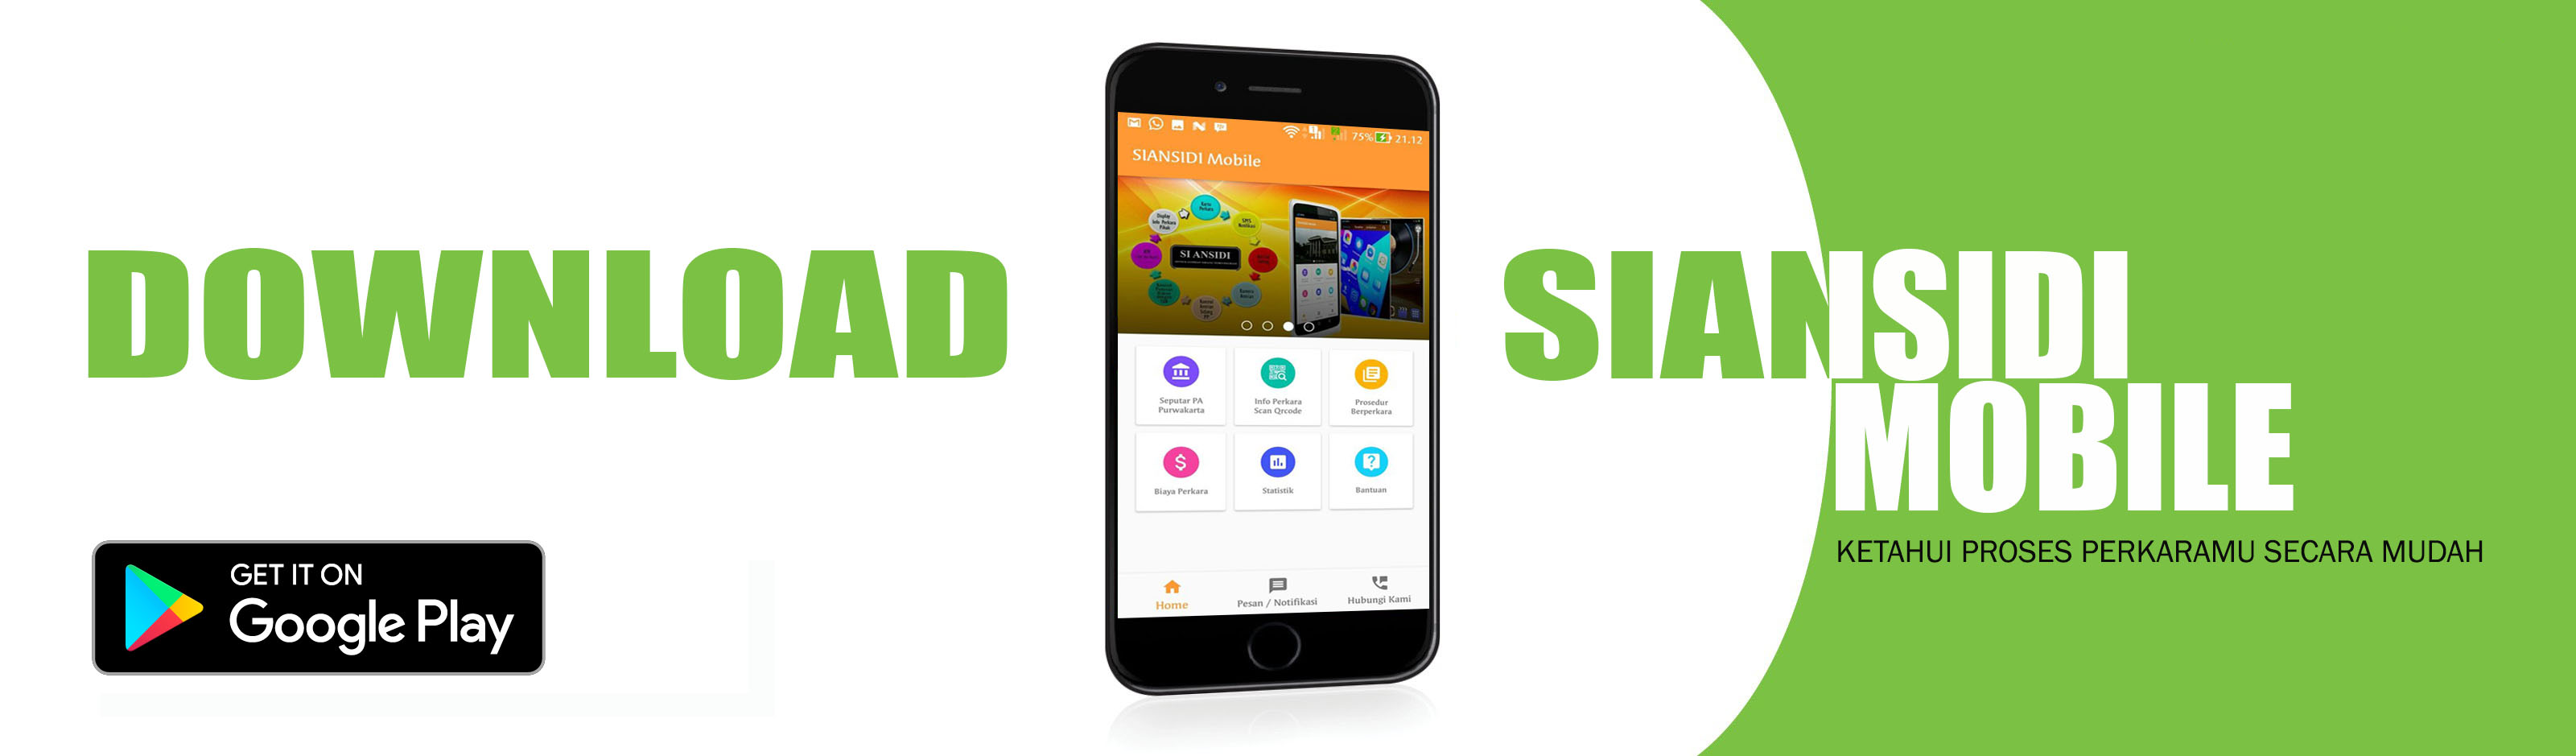 Siansidi Mobile play store only